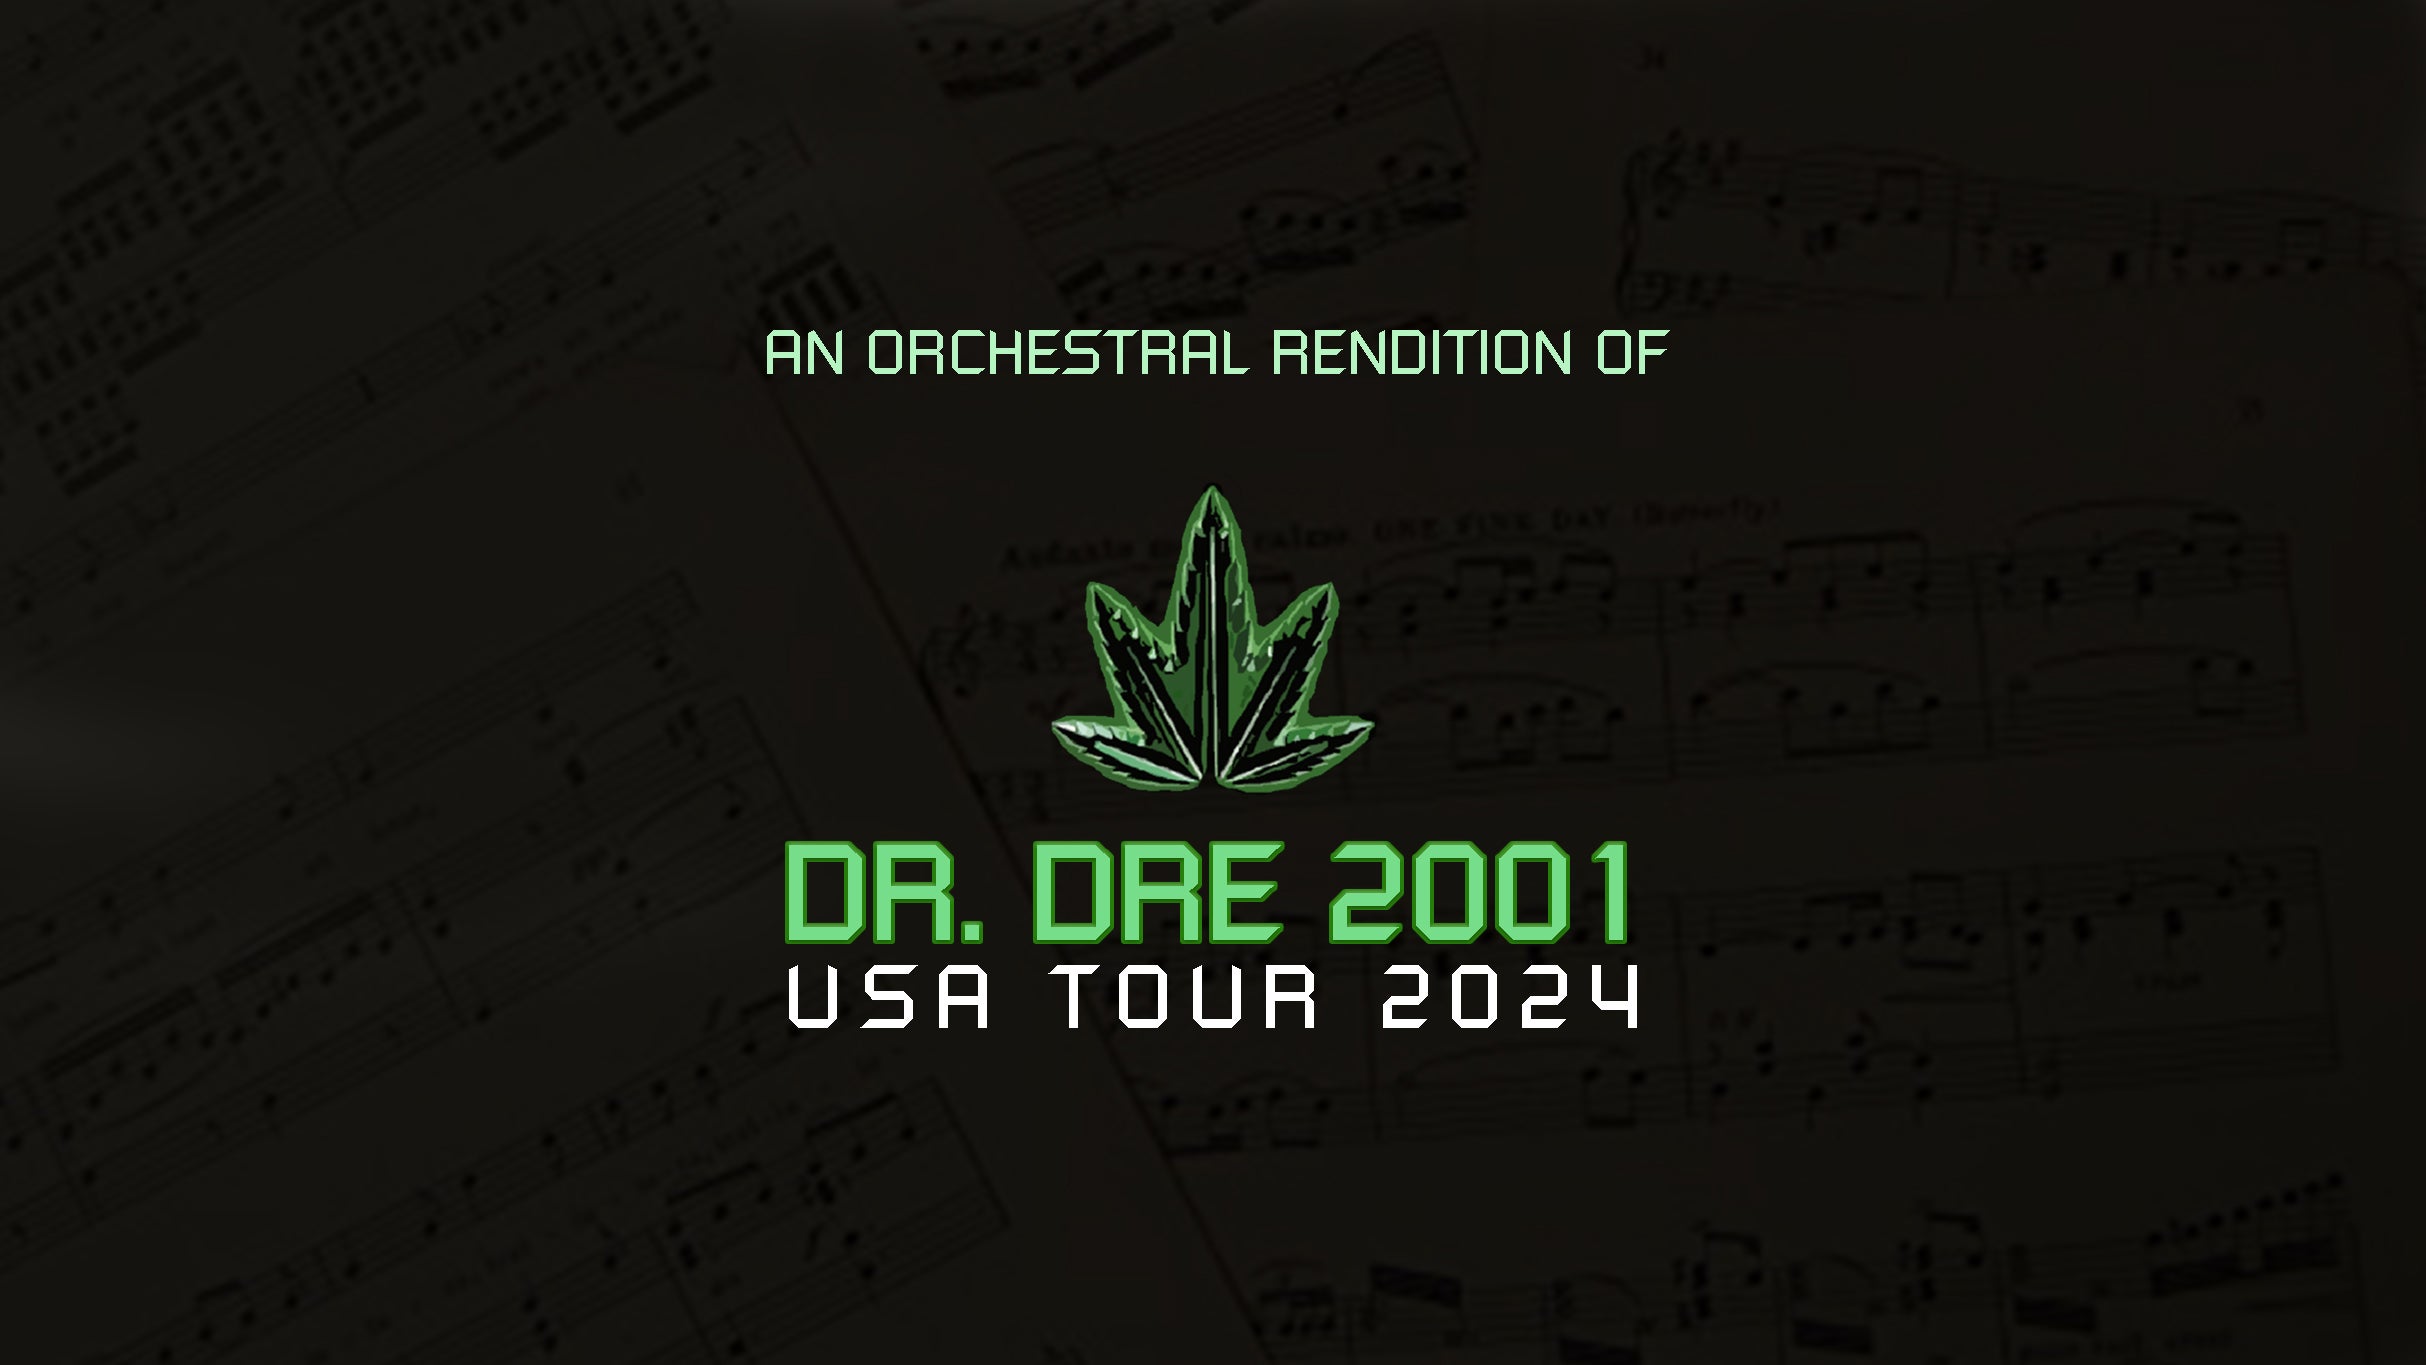 An Orchestral Rendition of Dr Dre 2001 at Ace of Spades